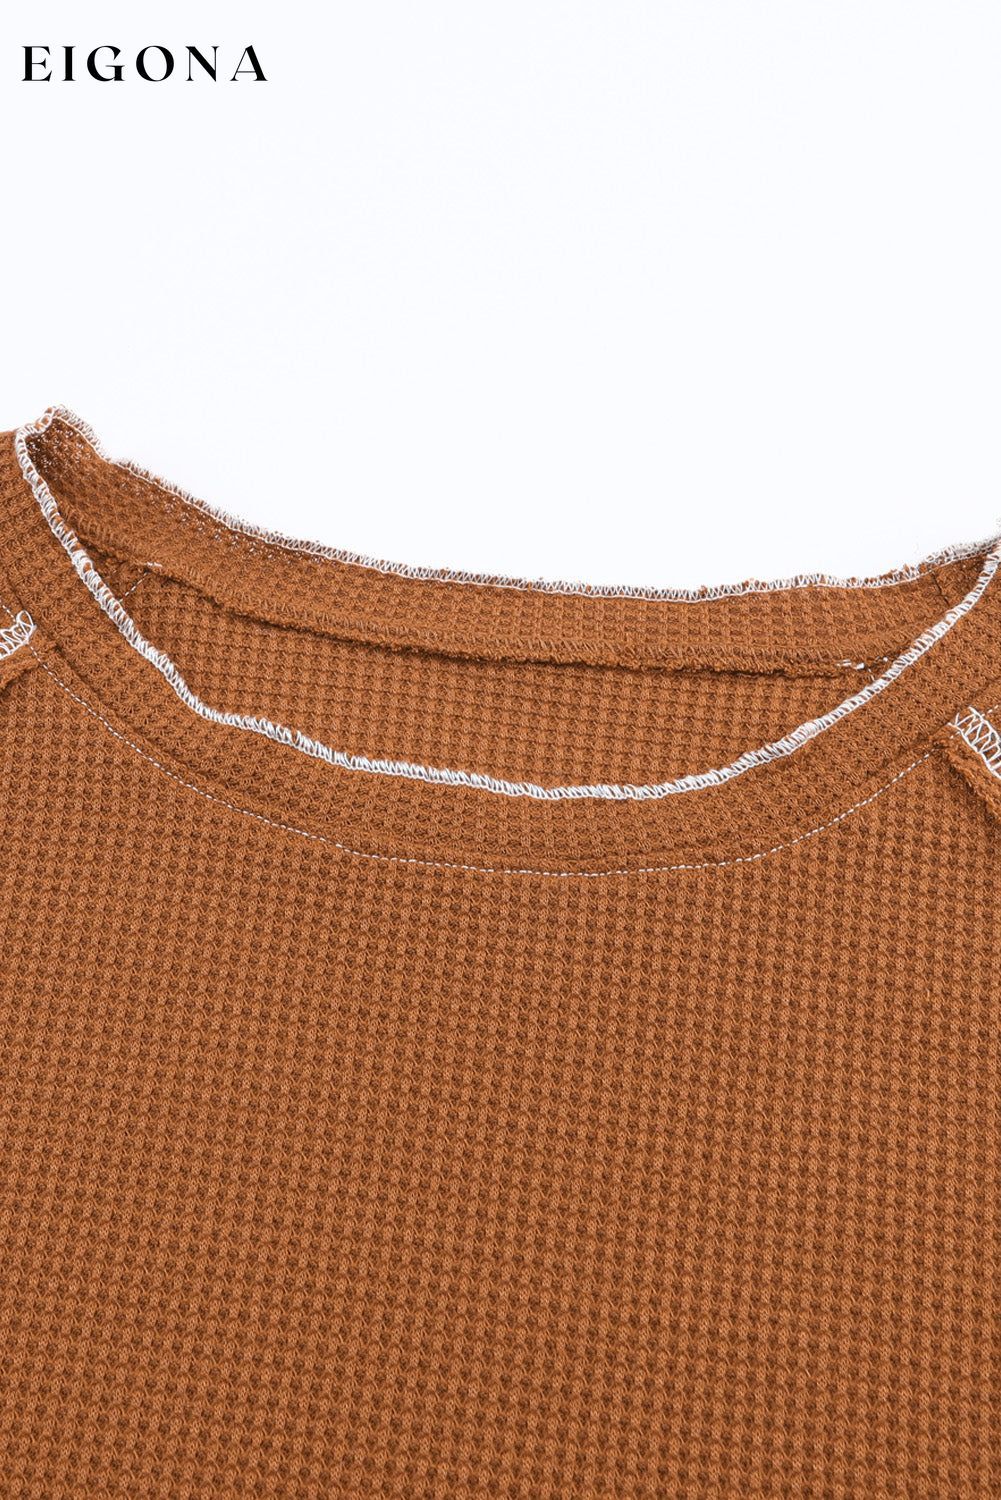 Brown Textured Round Neck Long Sleeve Top clothes DL Chic DL Exclusive Early Fall Collection Fabric Waffle Knit long sleeve long sleeve shirts long sleeve top Occasion Daily Print Solid Color Season Winter Style Casual tops